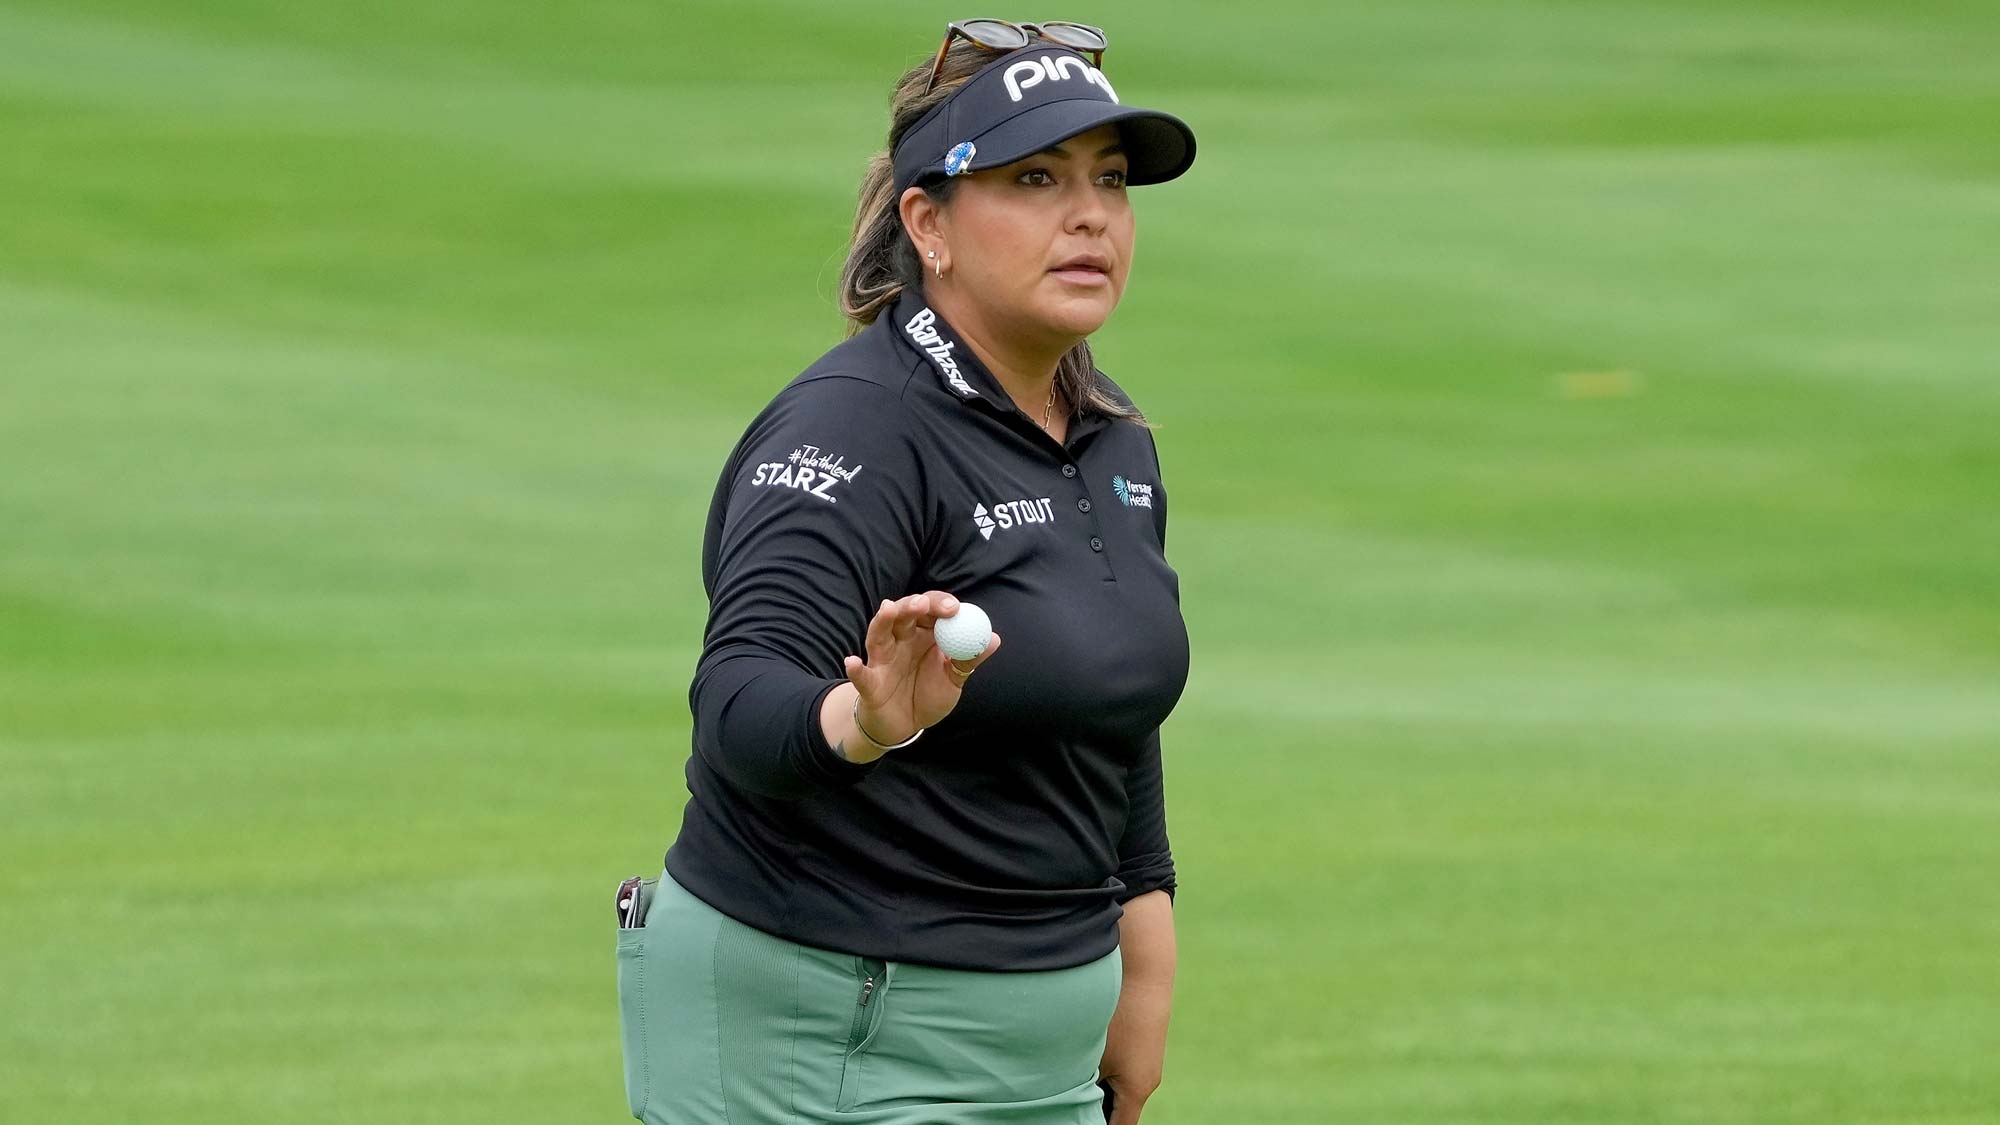 Lizette Salas of the United States reacts after making birdie on the eighth green during the final round of the Dow Great Lakes Bay Invitational